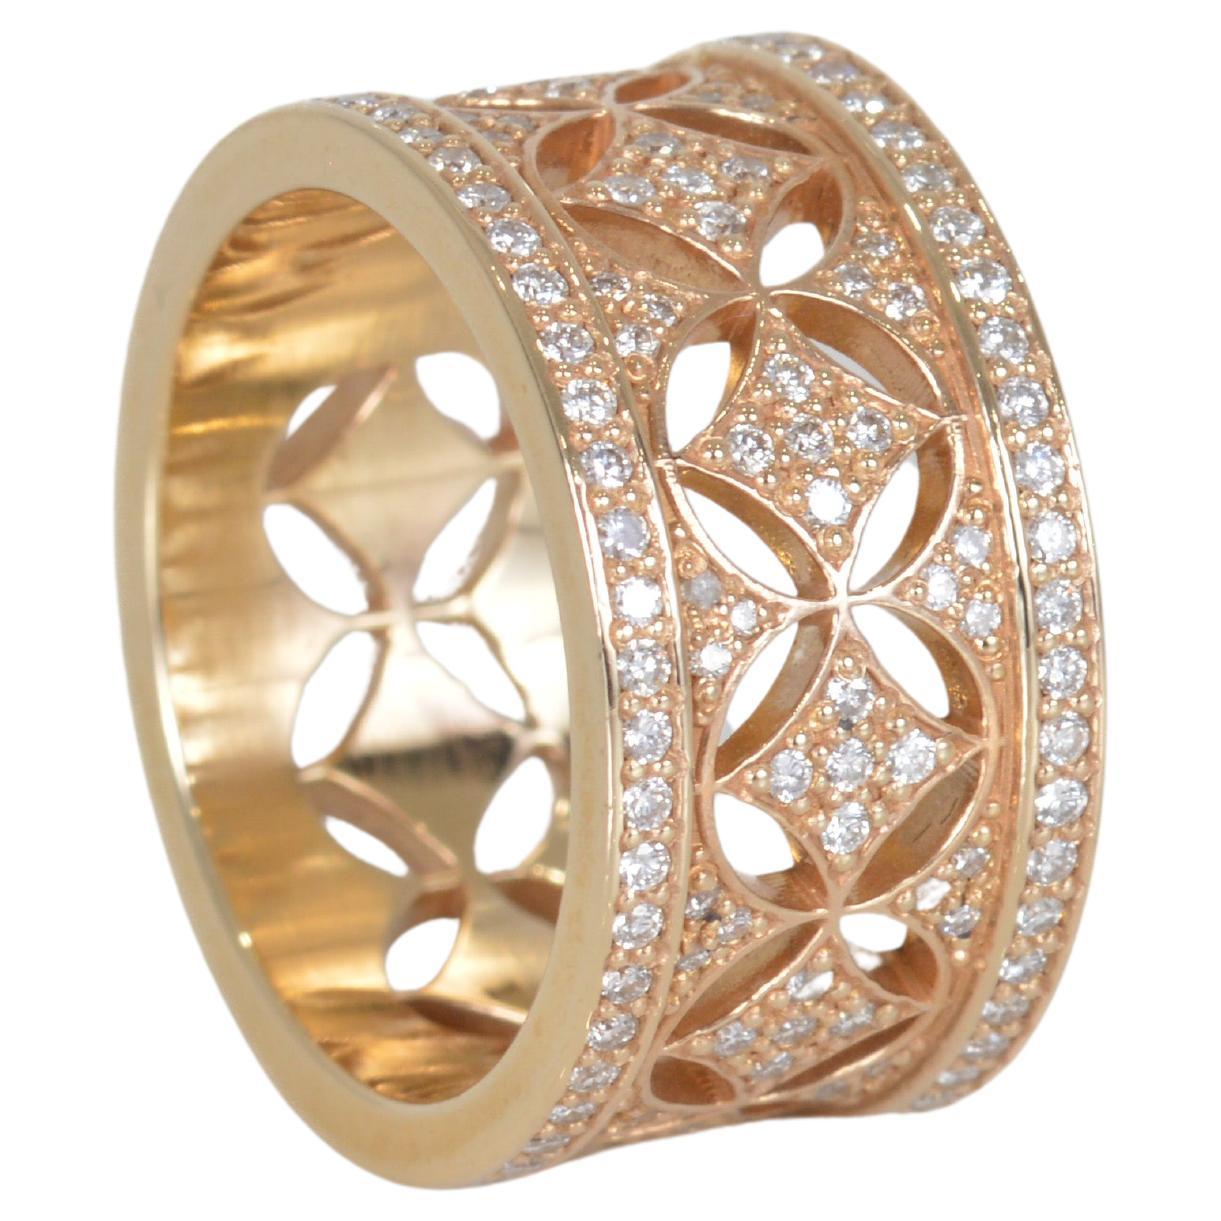 Wide Diamond Band in Yellow Gold